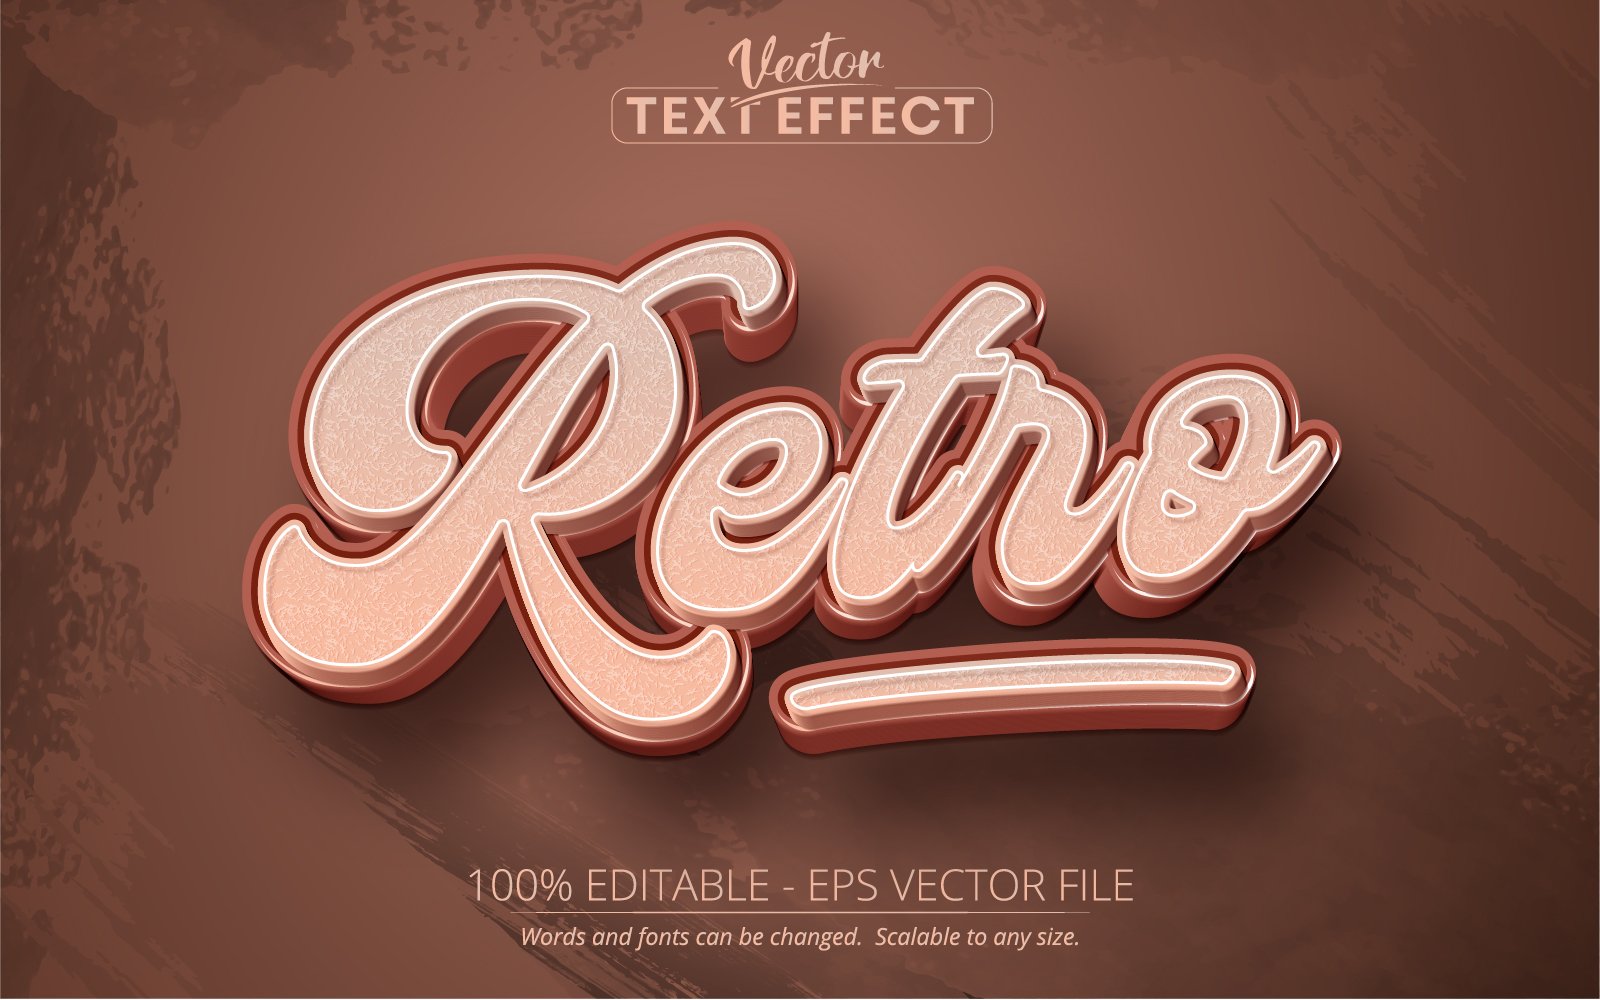 Retro - Editable Text Effect, Vintage And Retro 80s Text Style, Graphics Illustration